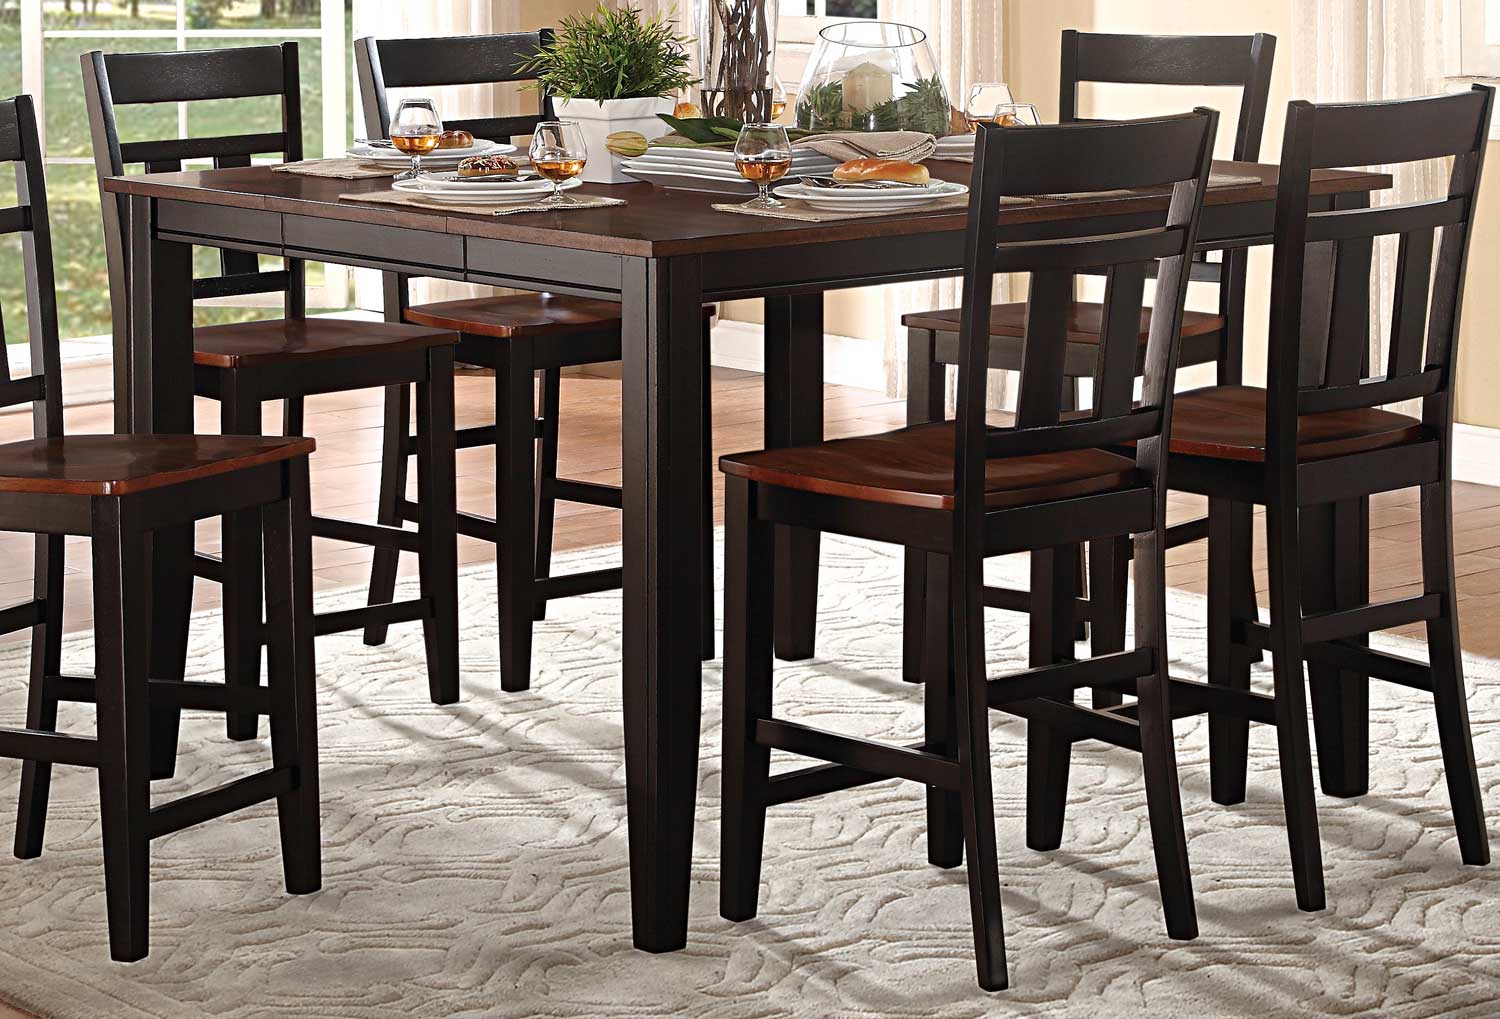 Homelegance Westport Counter Height Table - Two tone black/cherry